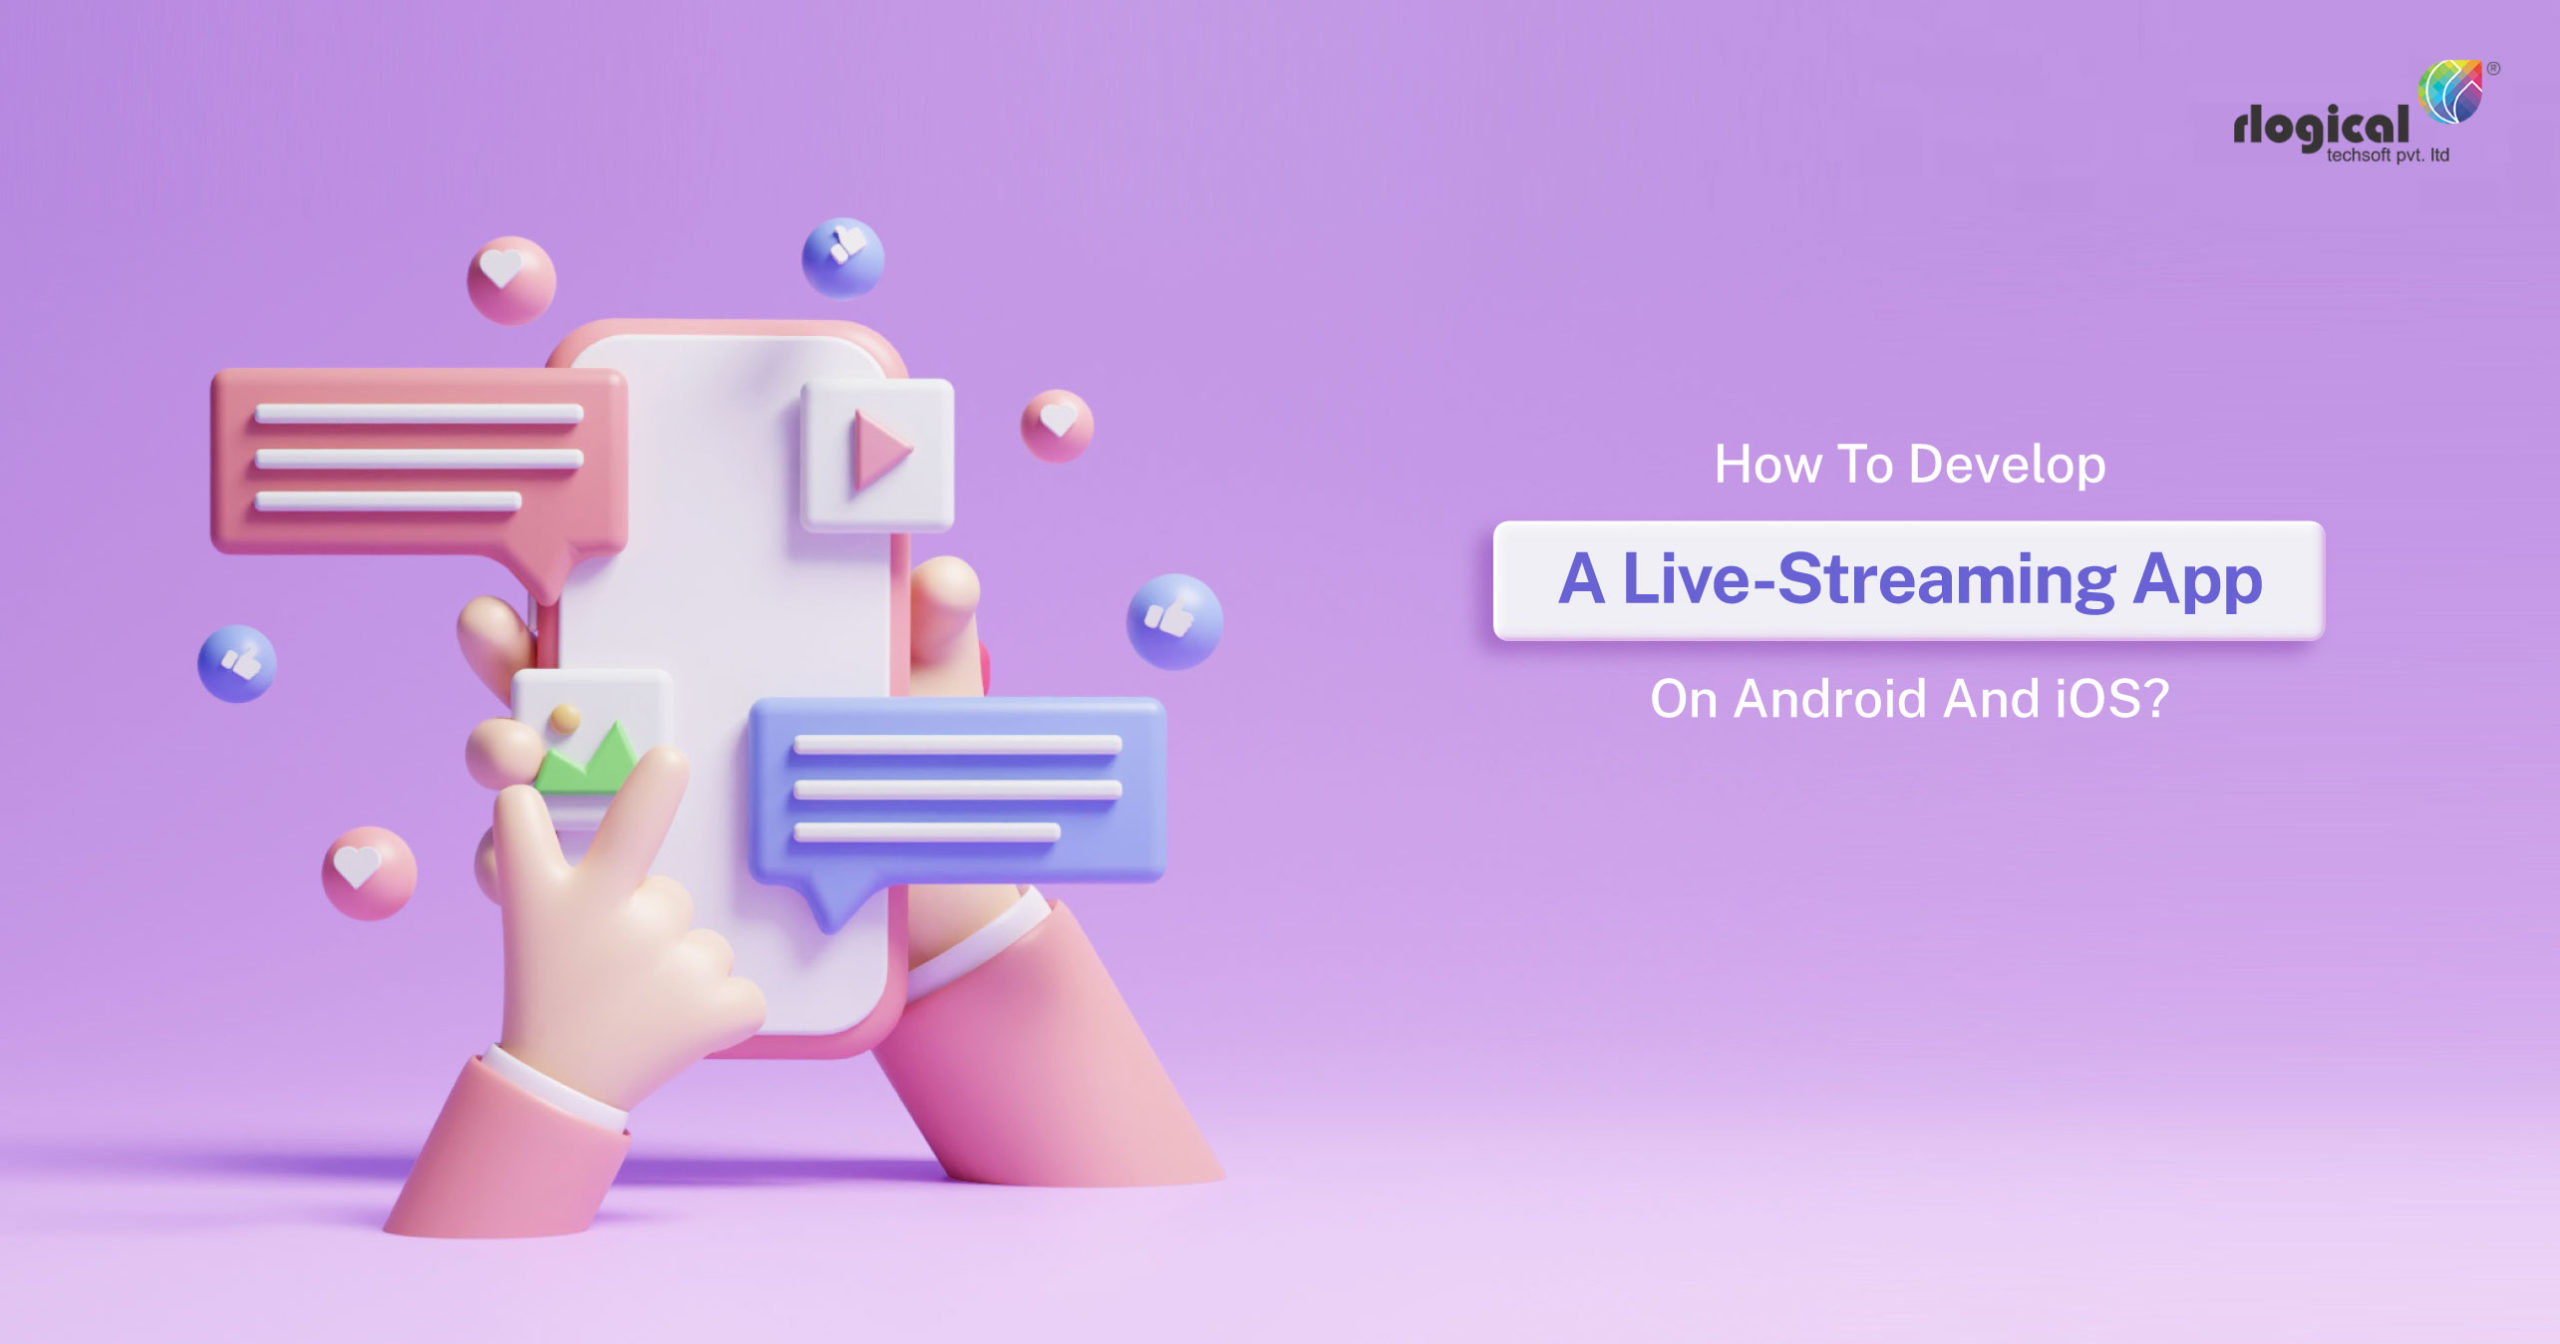 How To Develop A Live-Streaming App On Android And iOS?